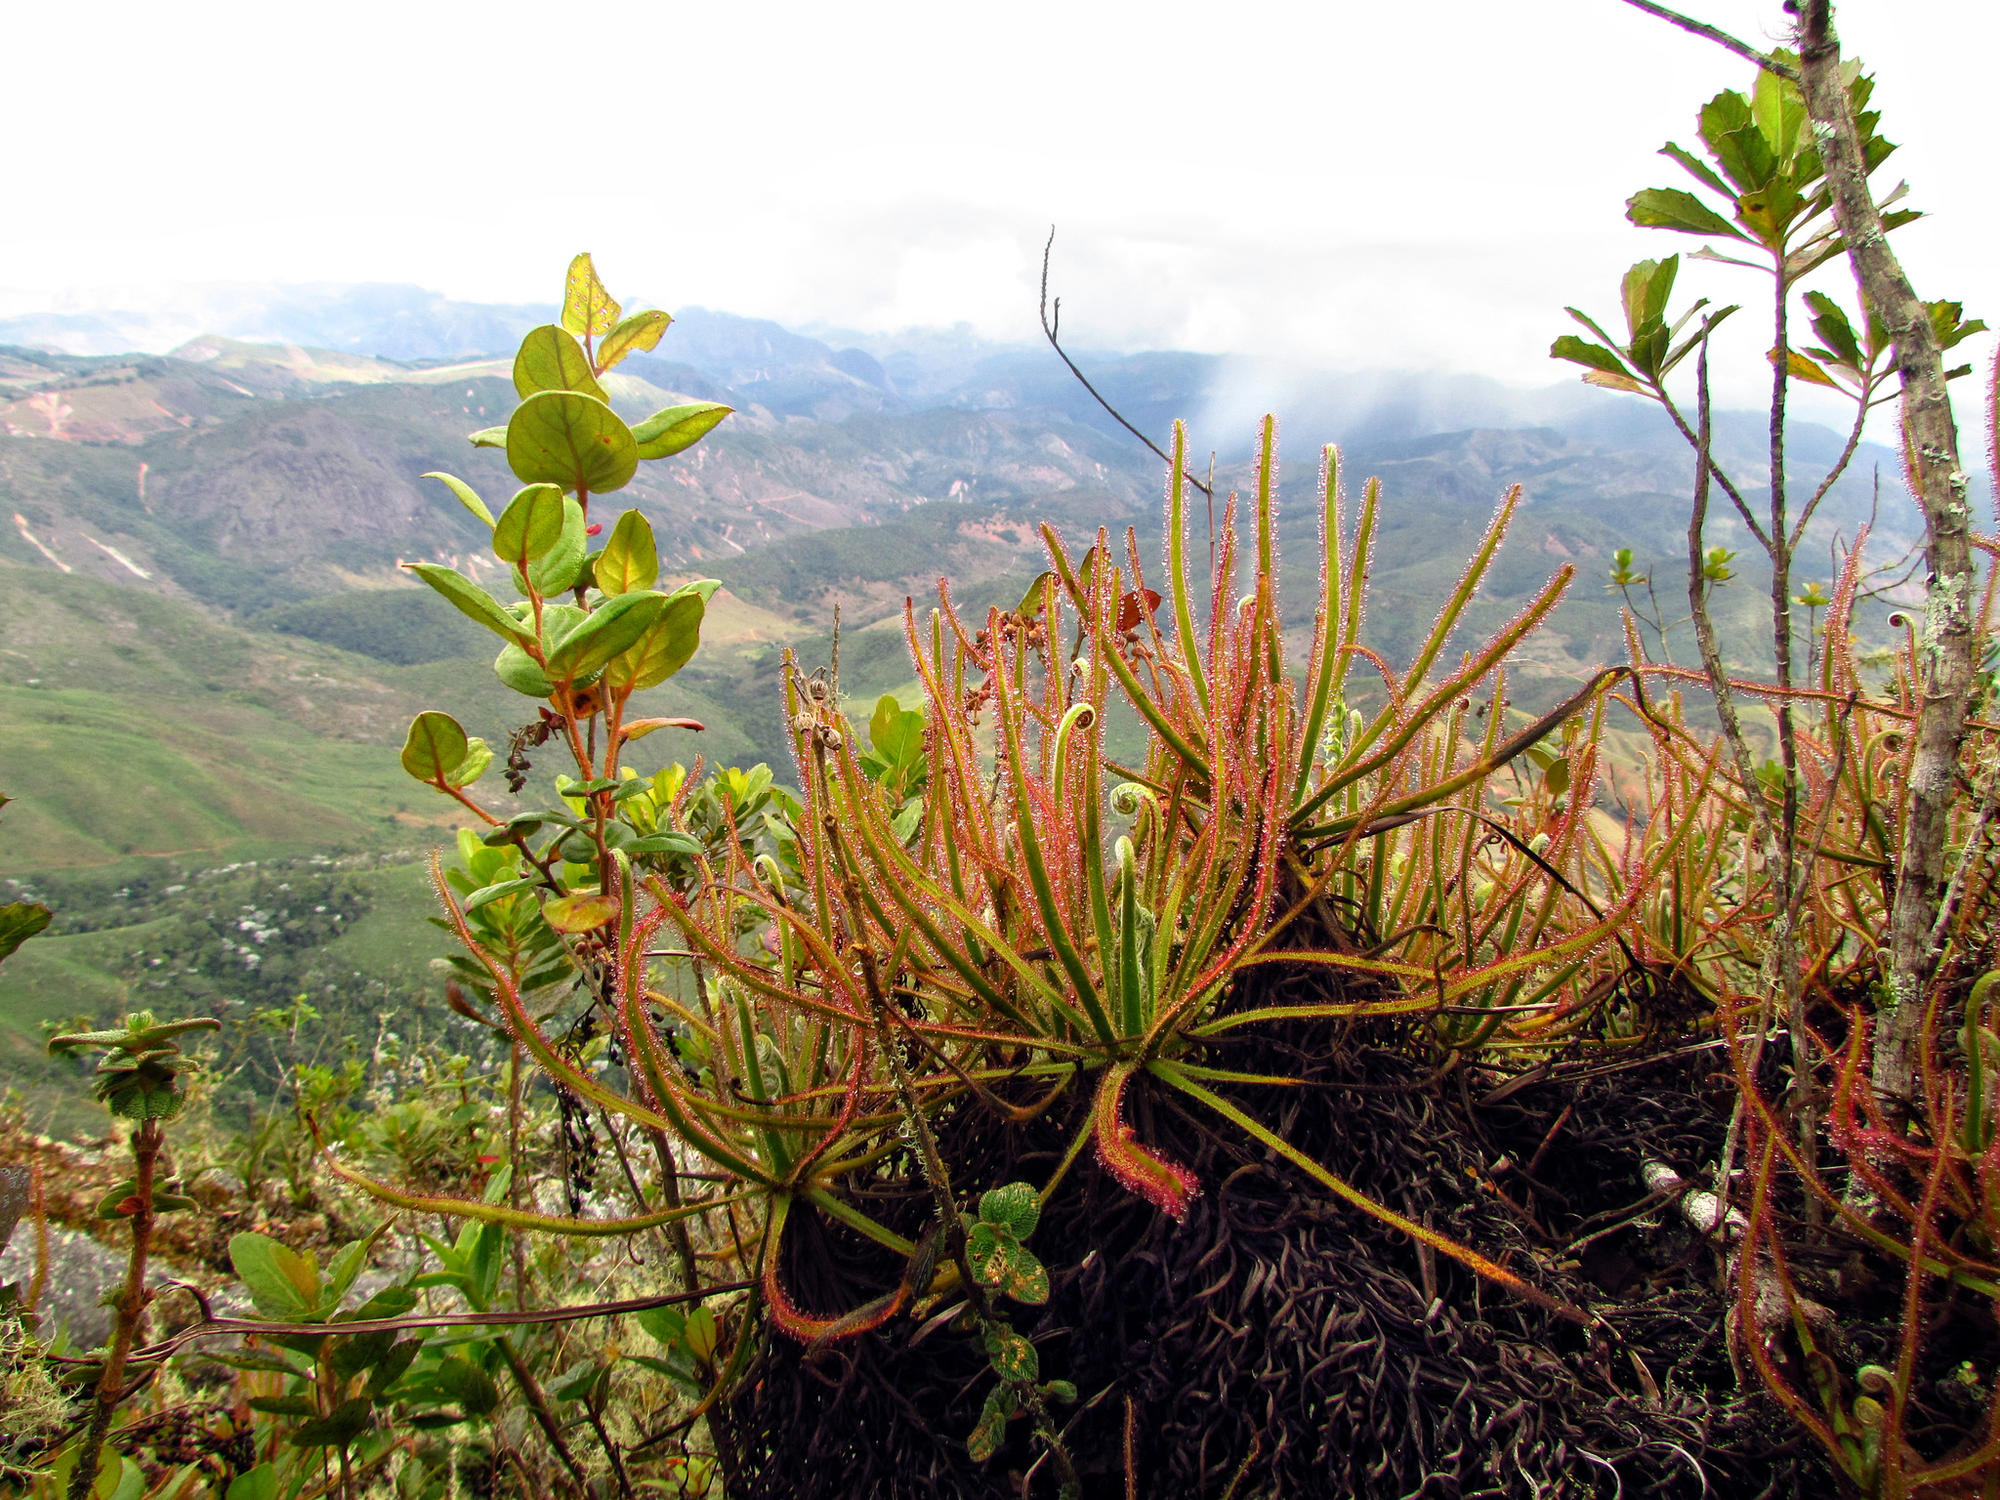 The carniverous giant sundew with other plants in Brazil.